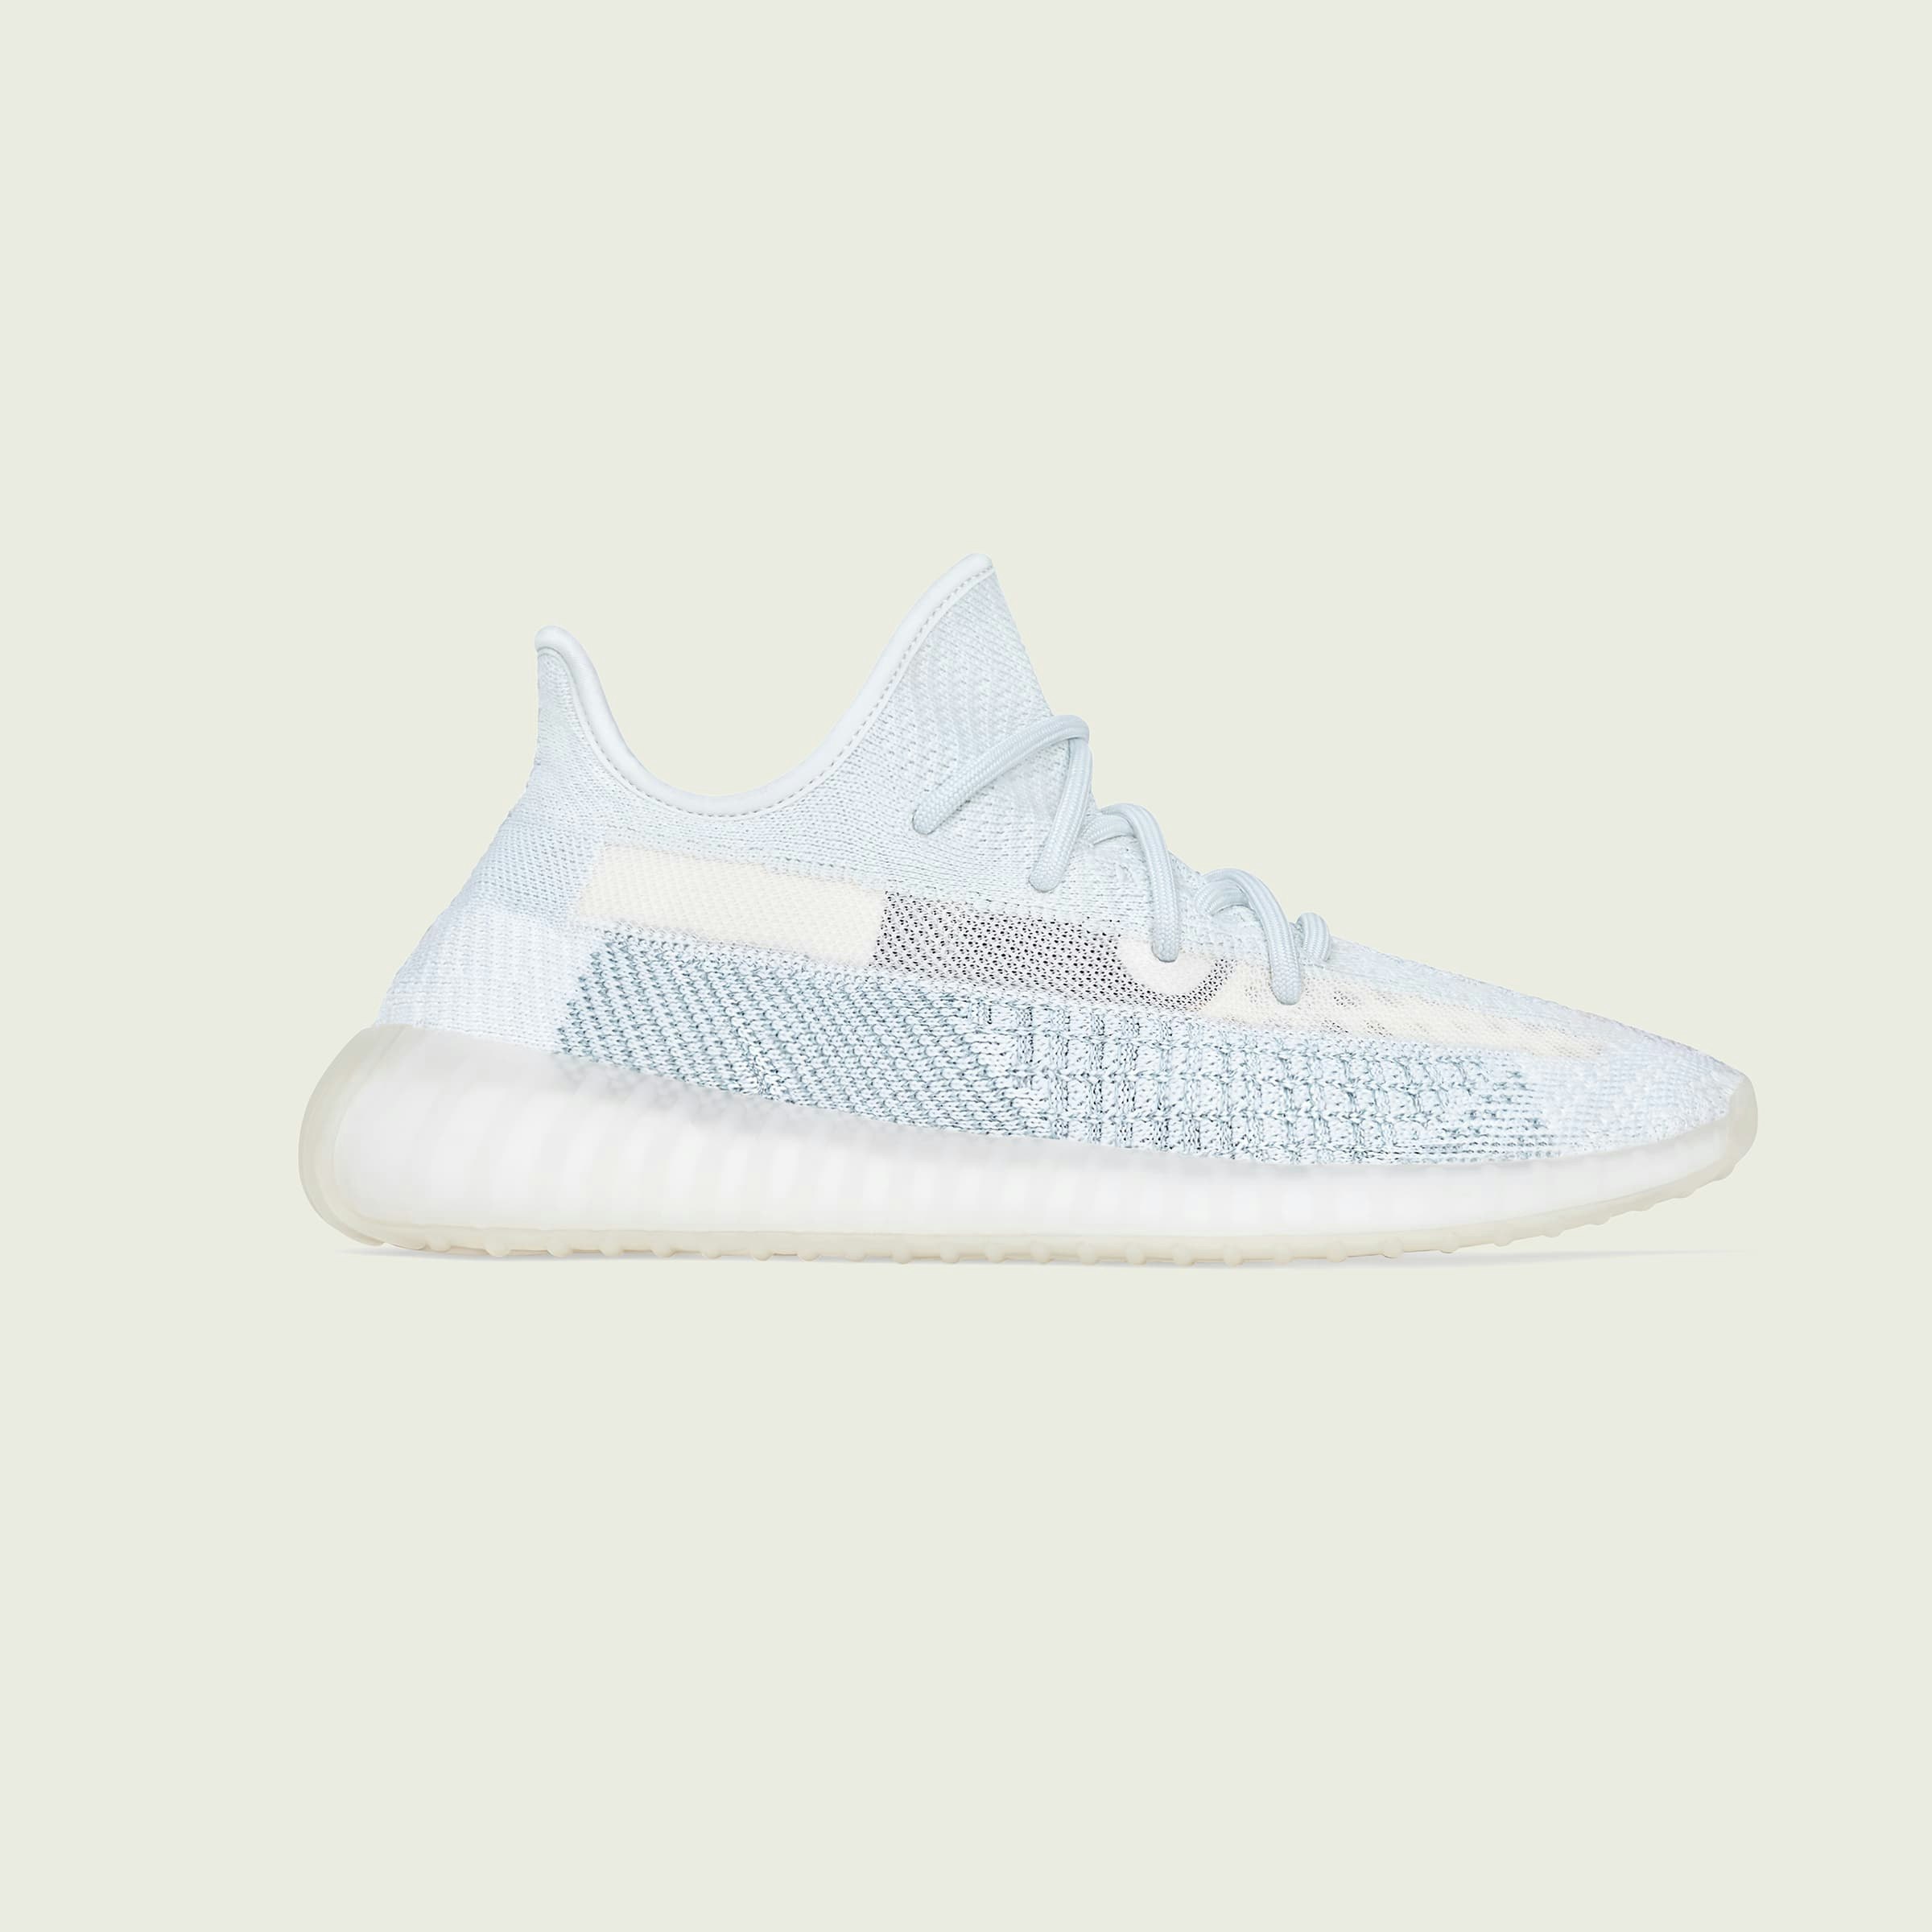 adidas Yeezy Boost 350 V2 “Cloud White”